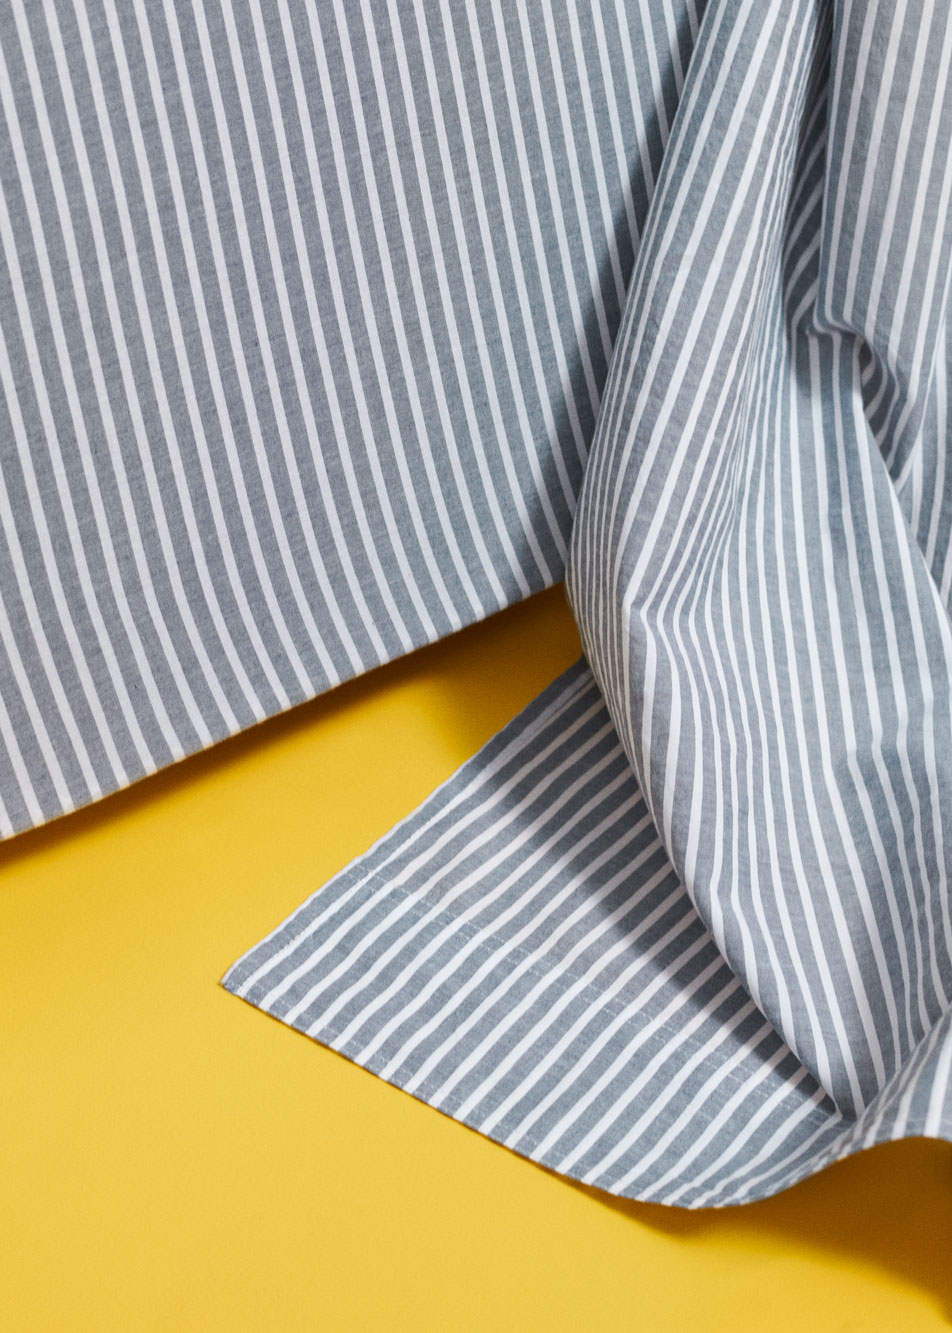 A blue and white striped sheet lying tousled on a bright yellow background